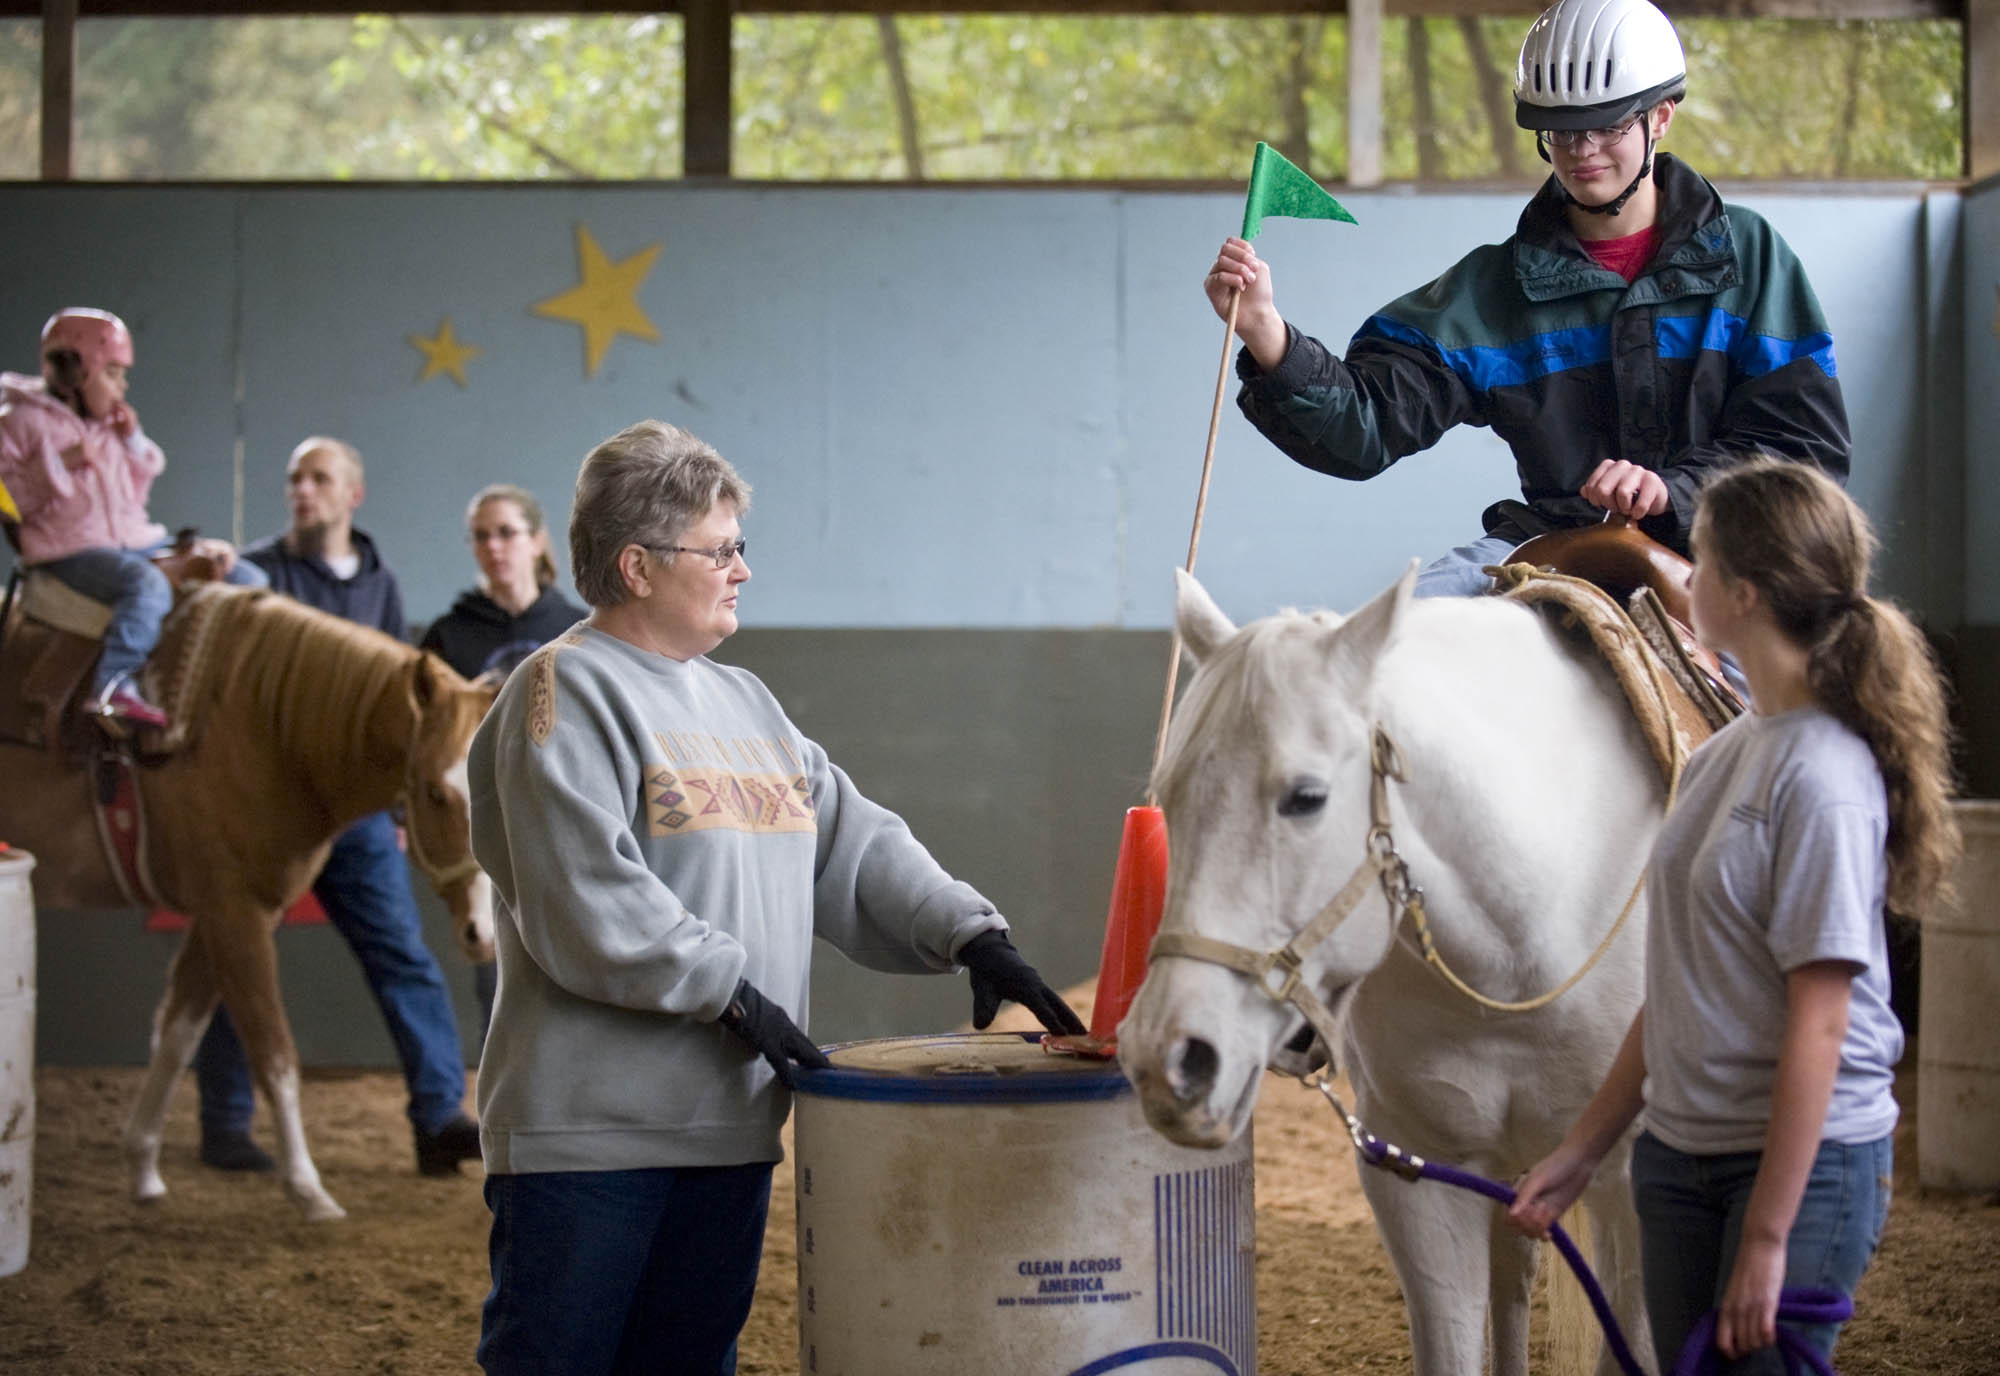 Nancy Elder, center, owner of the Healing Winds Inc., helps lead Tim Smith, 14, through an exercise while on horse back on Saturday November 6, 2009. Elder has been running the center for 20 years, which works mostly with developmentally disabled children. Tim has been visiting the center for 8 years.